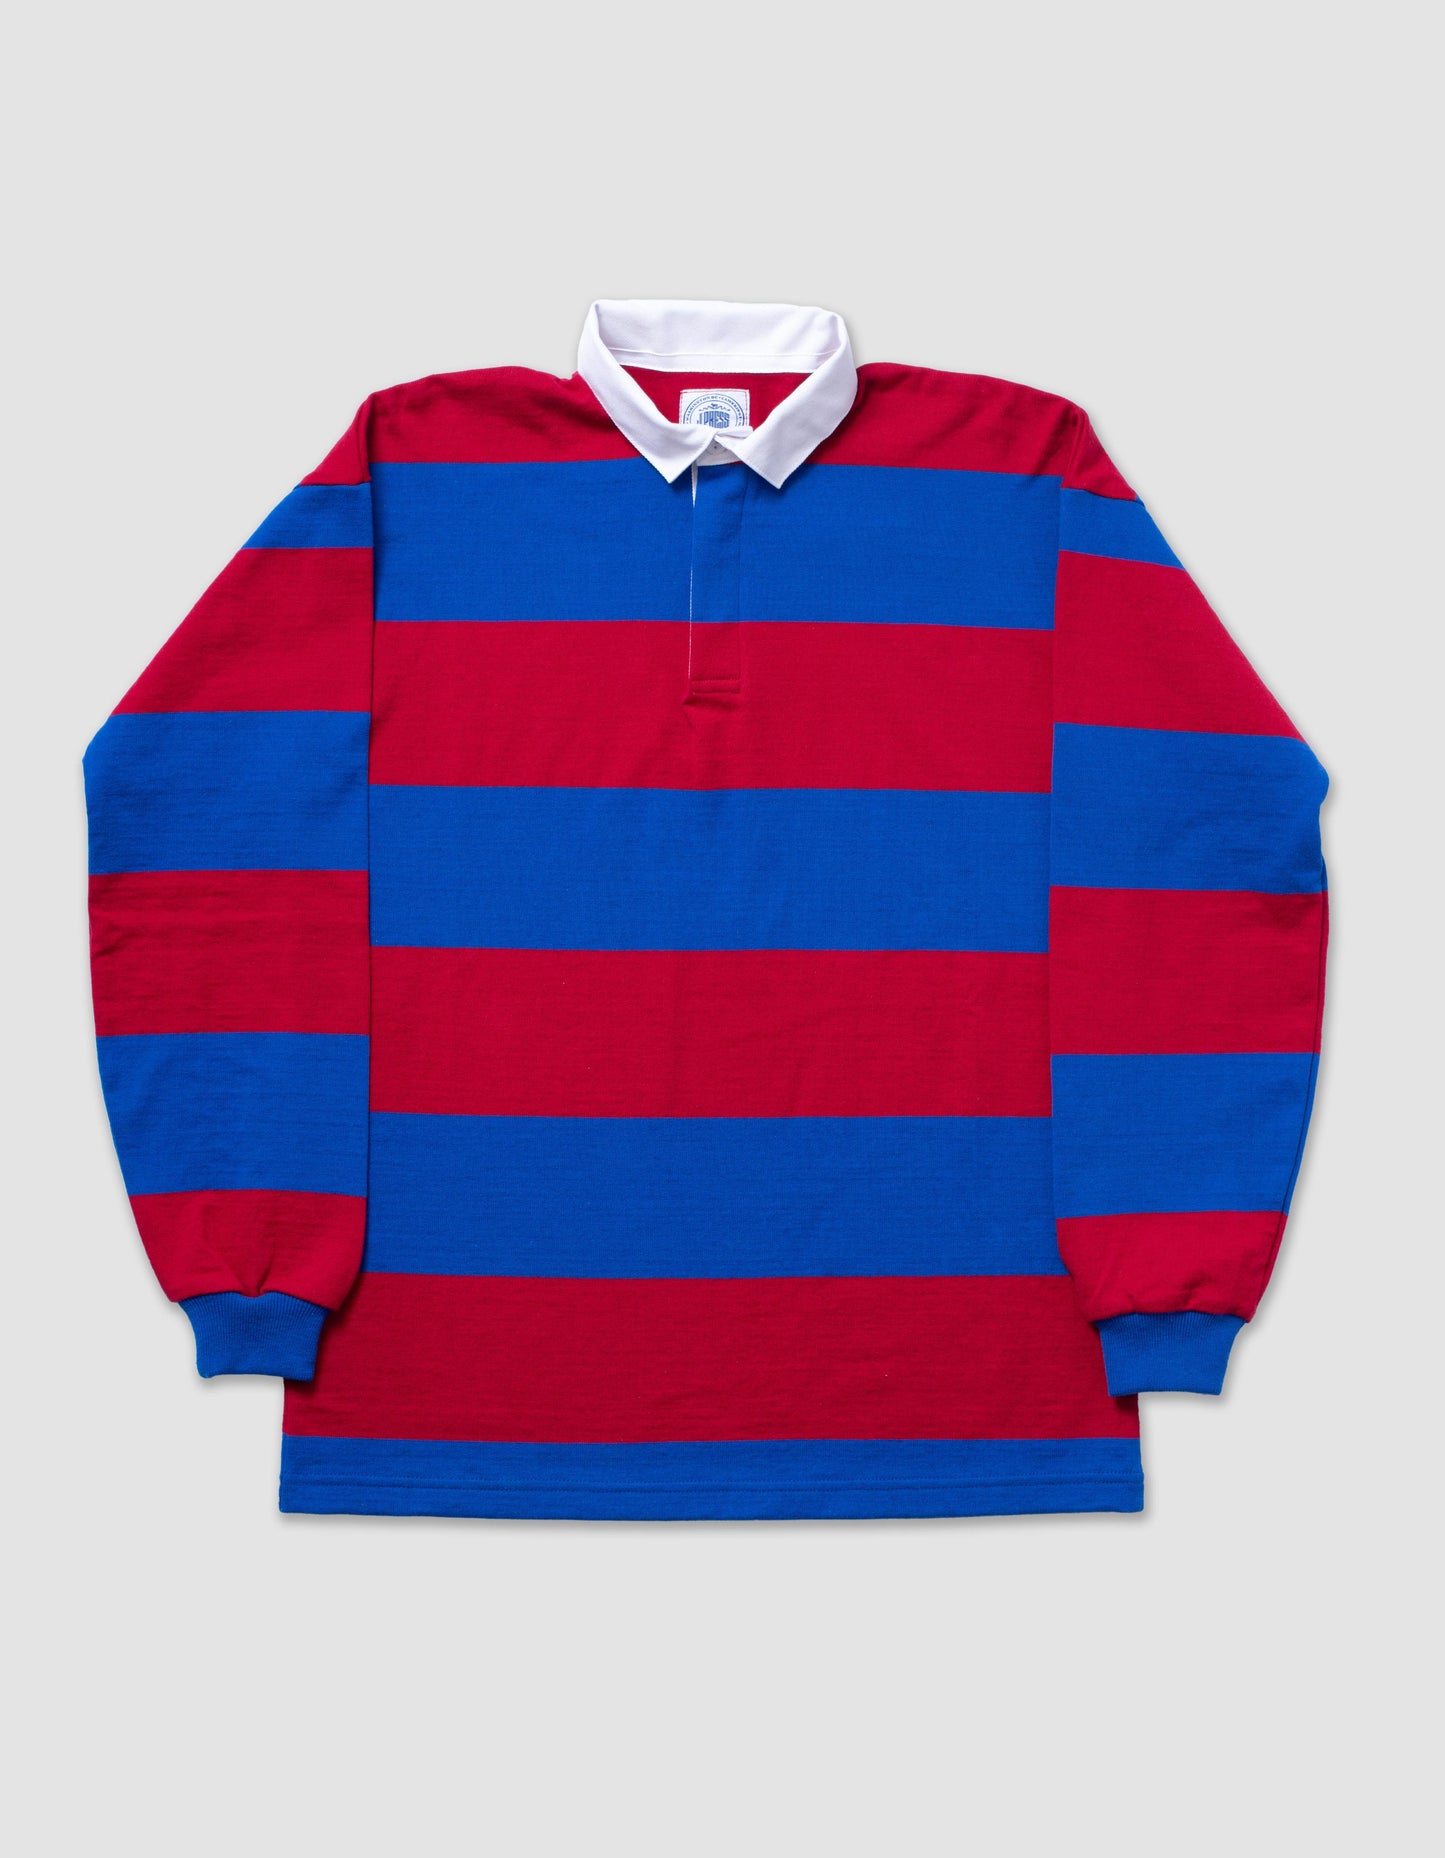 CLASSIC STRIPE RUGBY SHIRT - ROYAL/RED